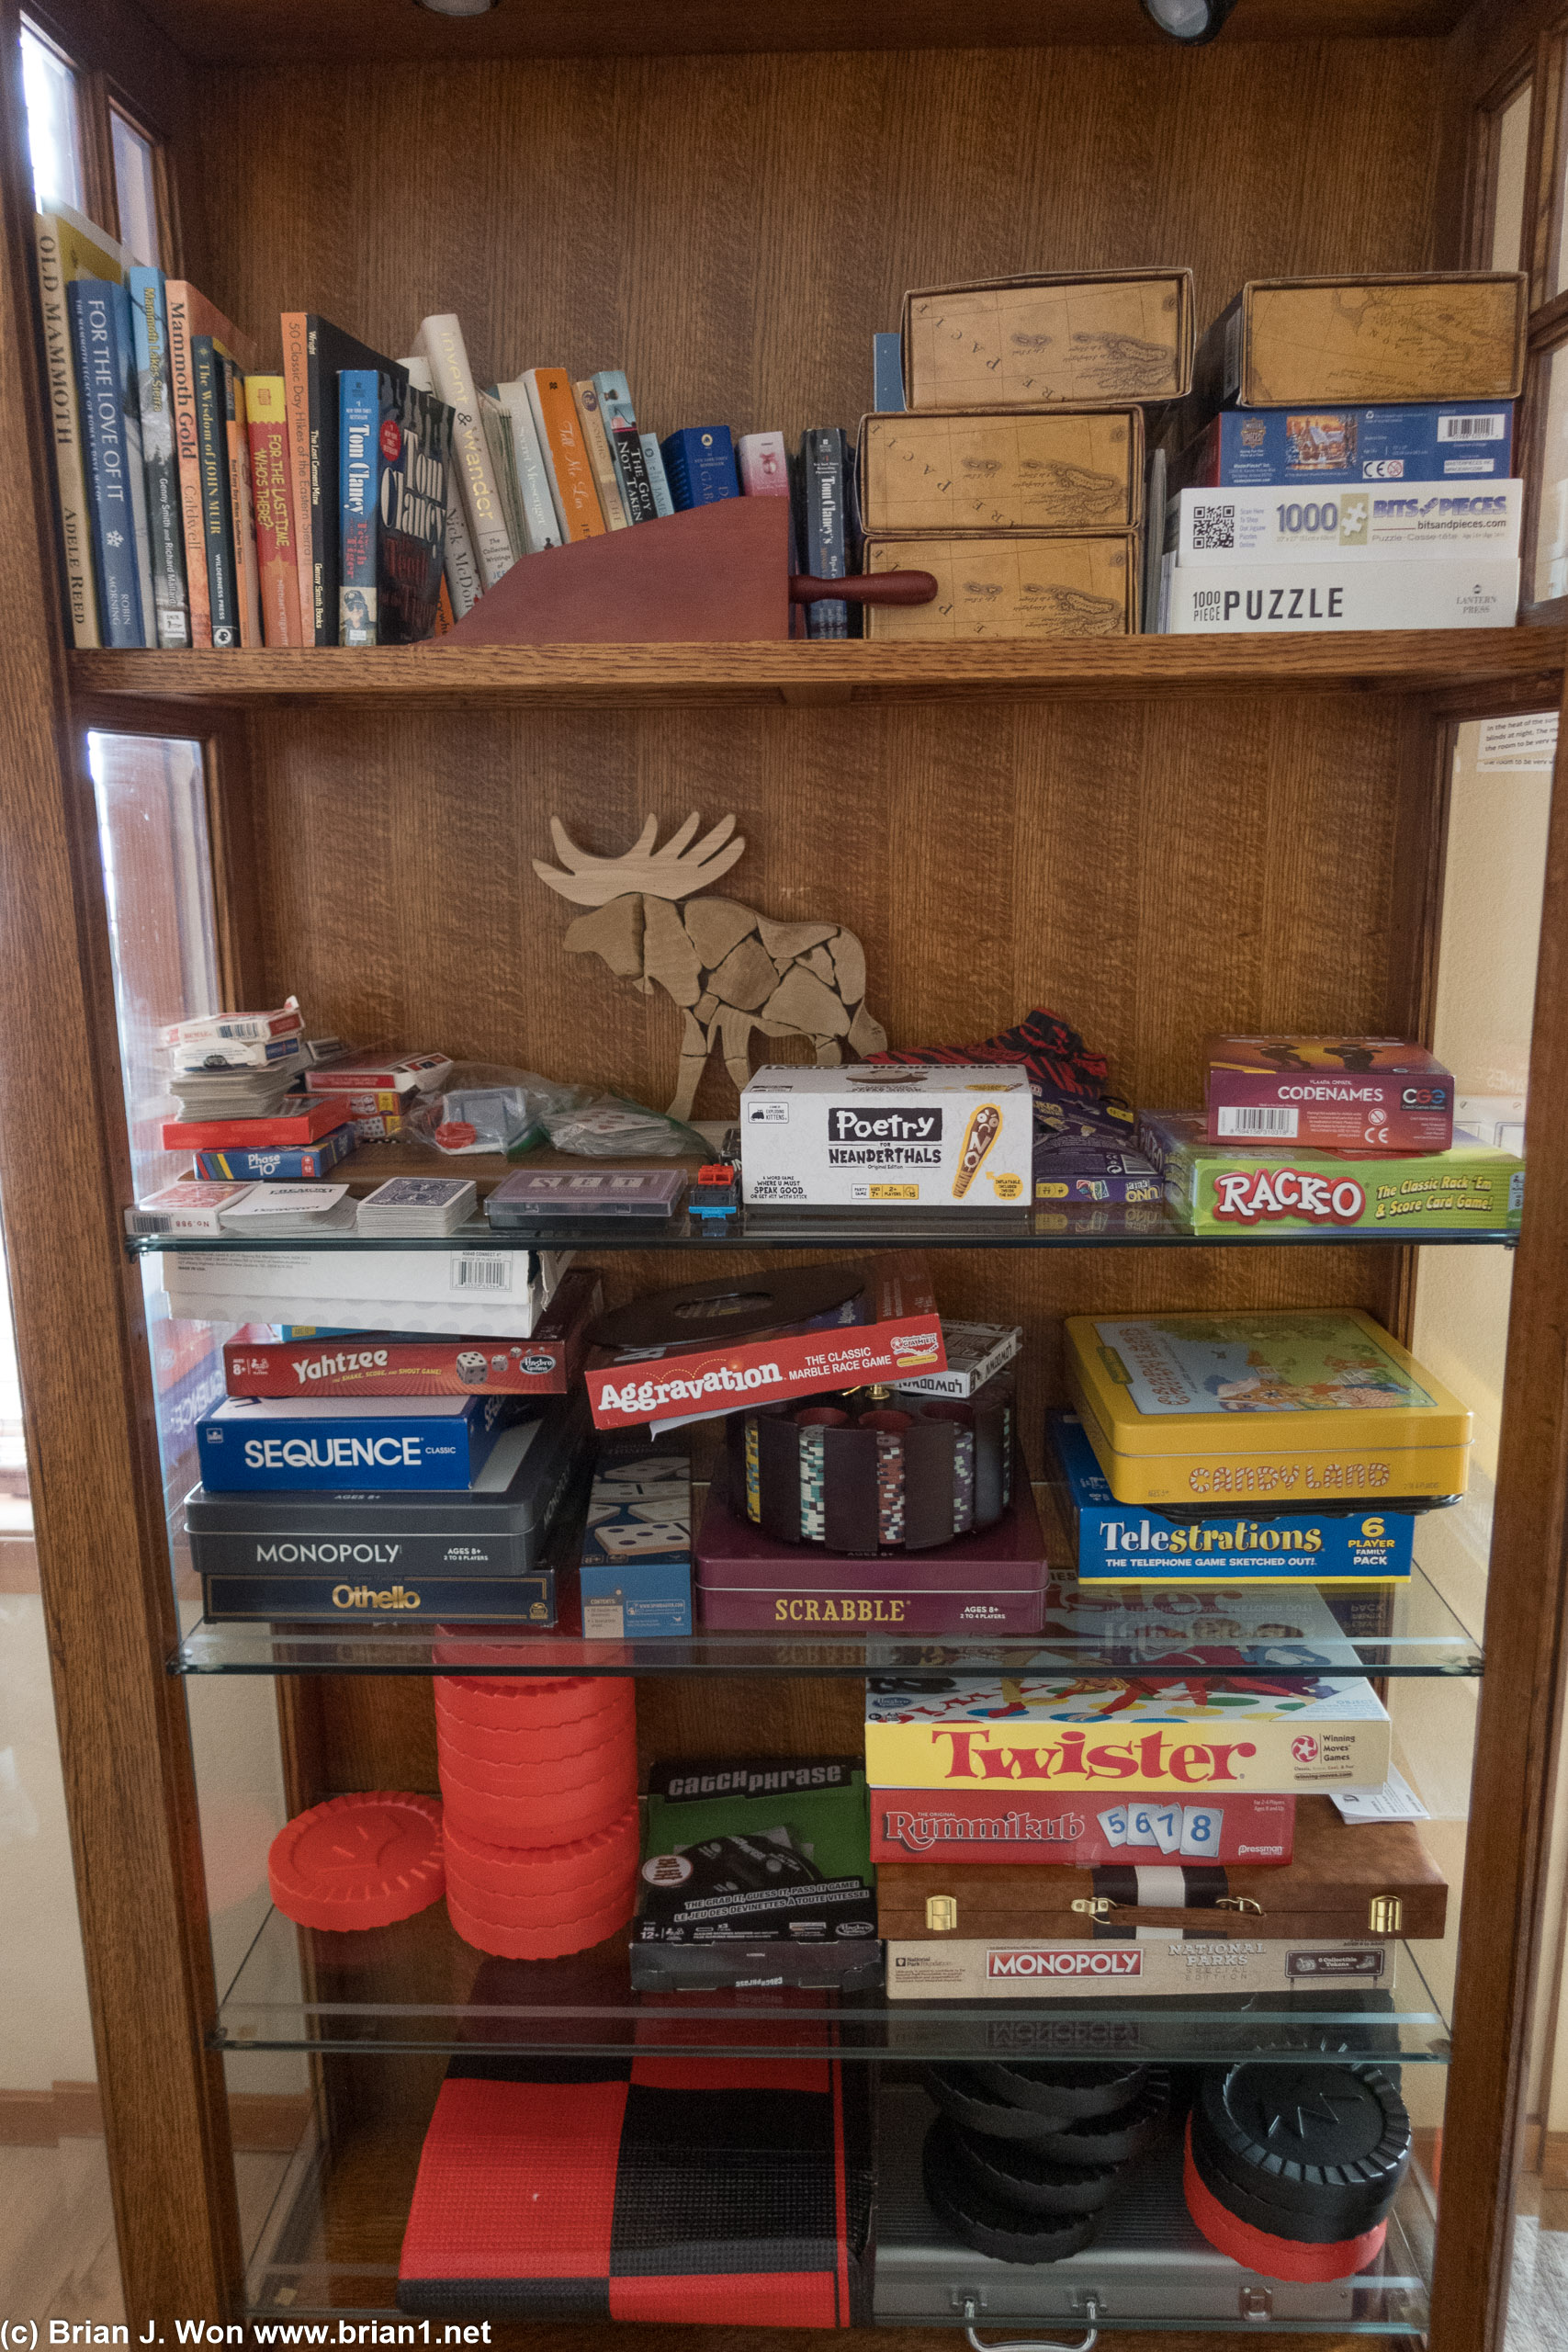 Stocked with board games and puzzles.